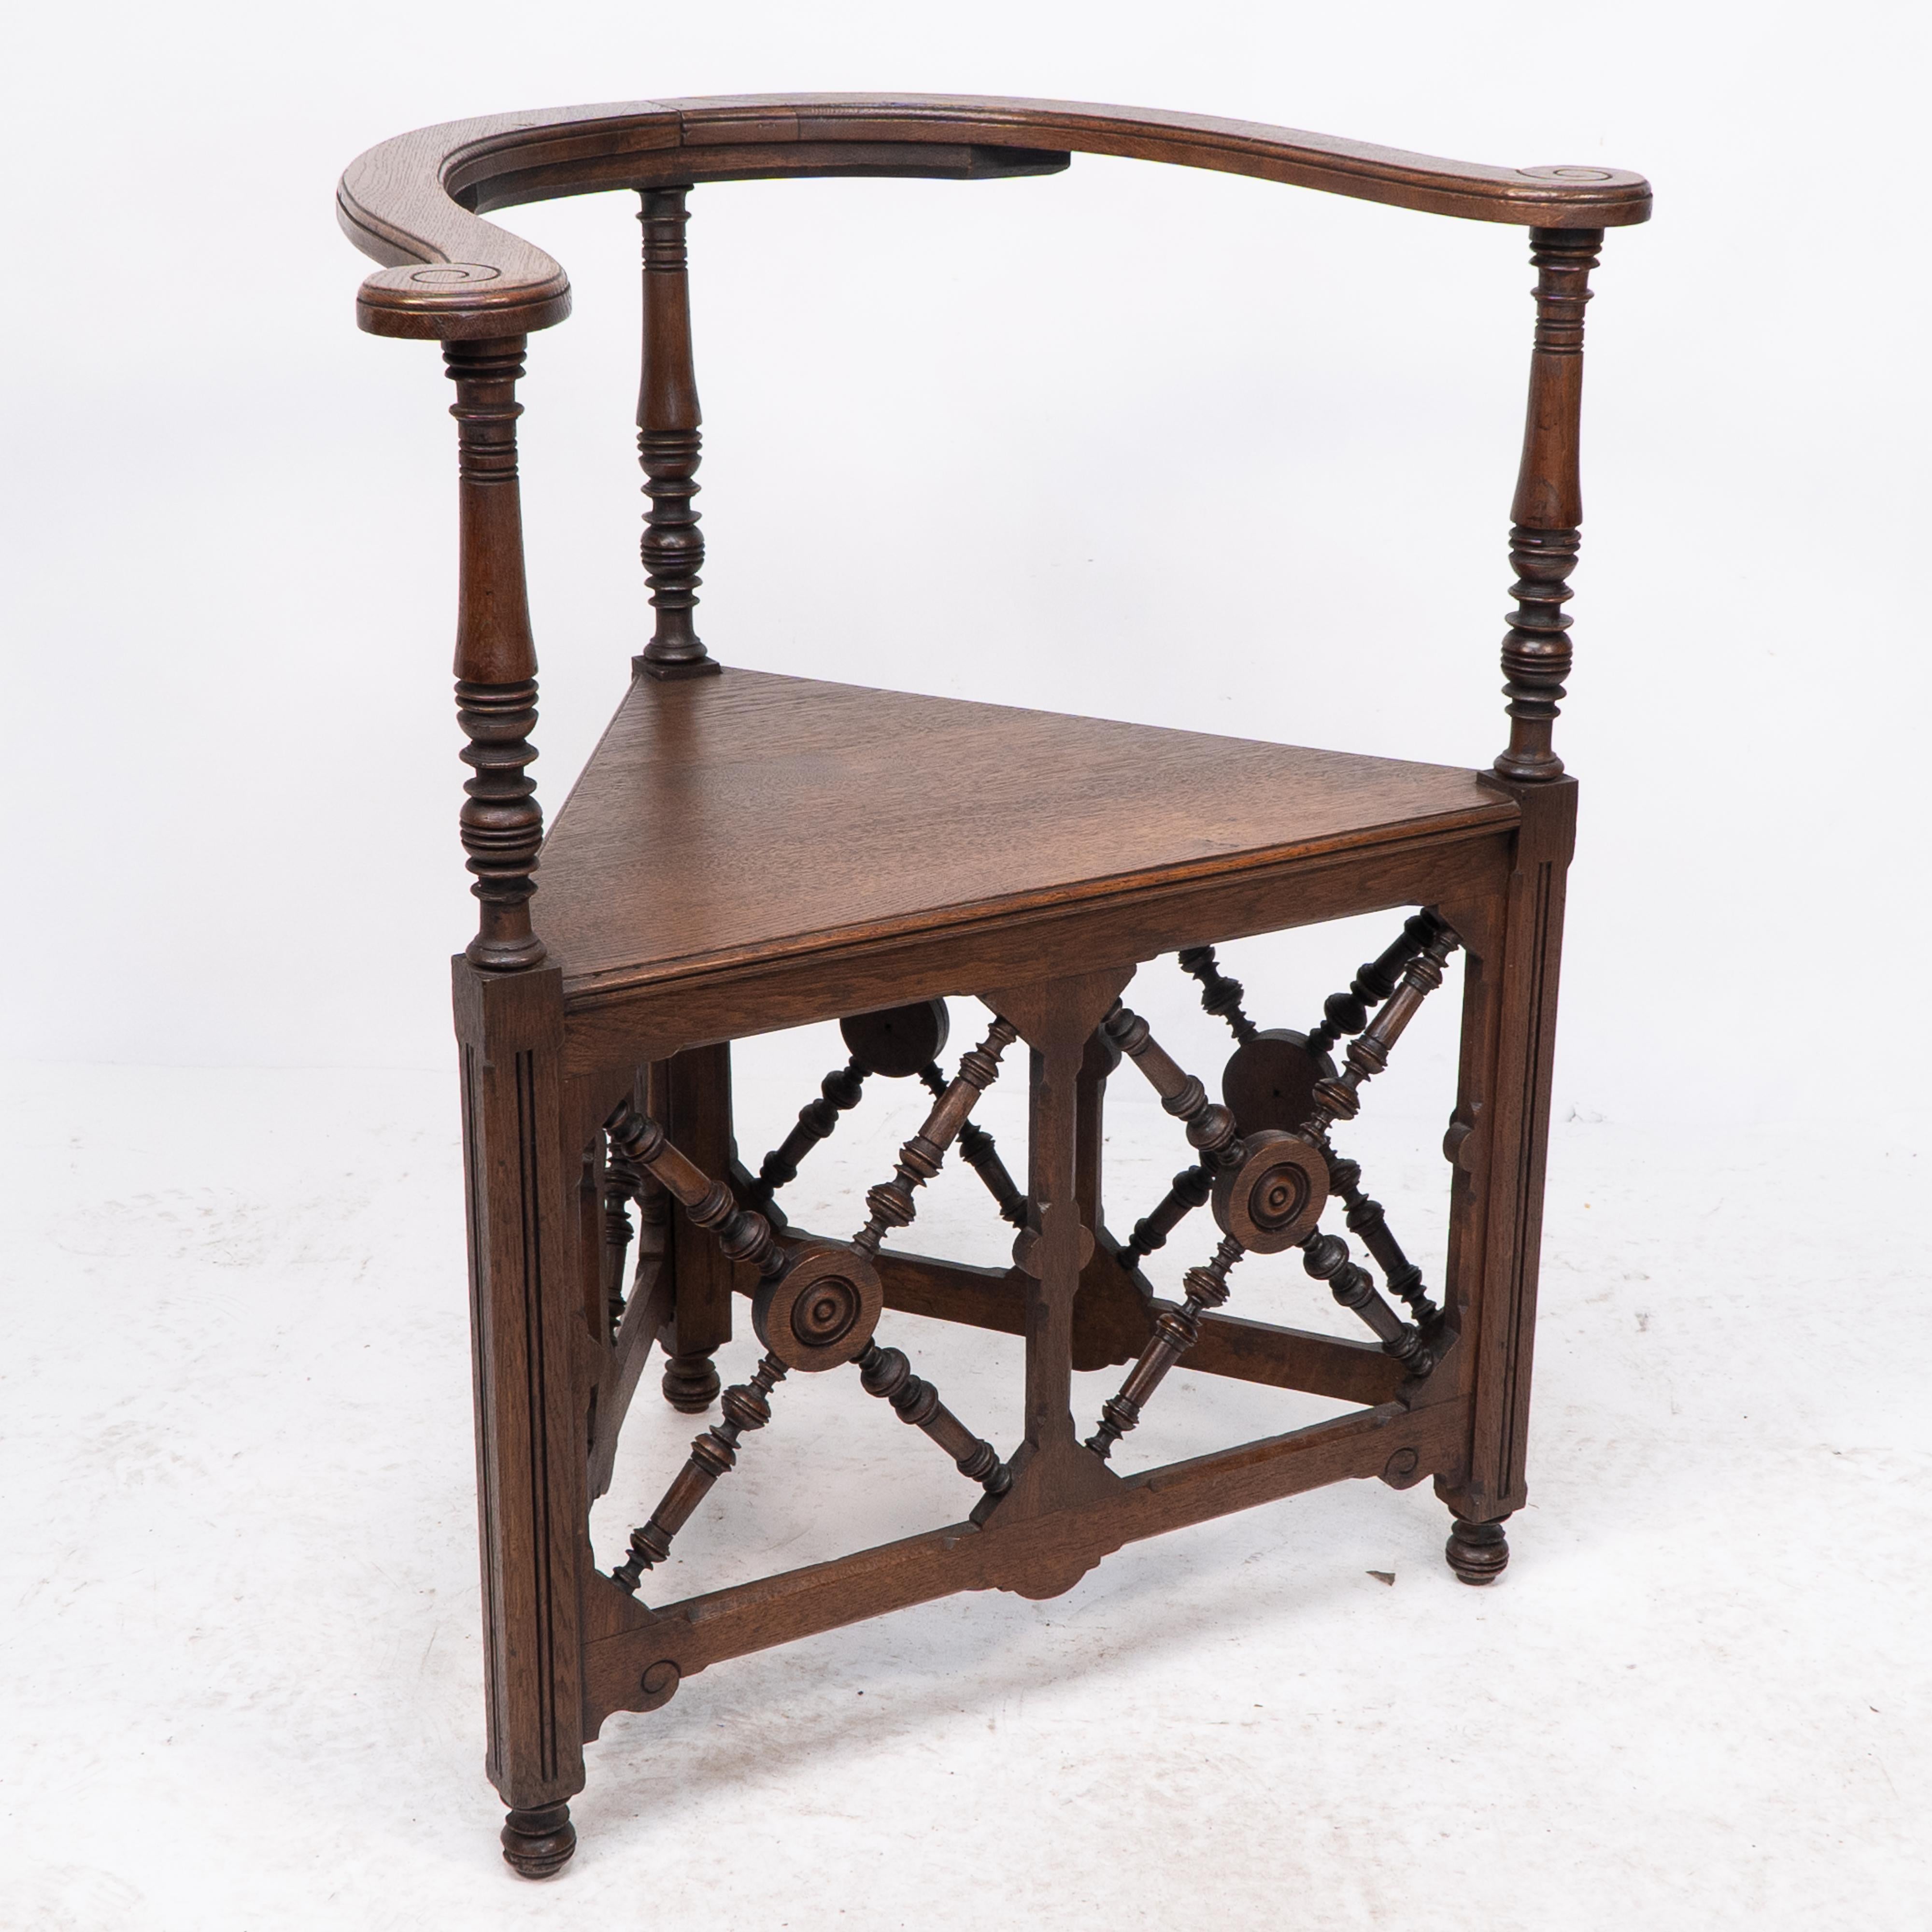 Jas Shoolbred. 
An exceptional English Aesthetic Movement oak corner armchair with wrap-around arms with incised scrollwork decoration to the top of the arm ends with turned supports below and tramline details to the legs, a triangular seat with